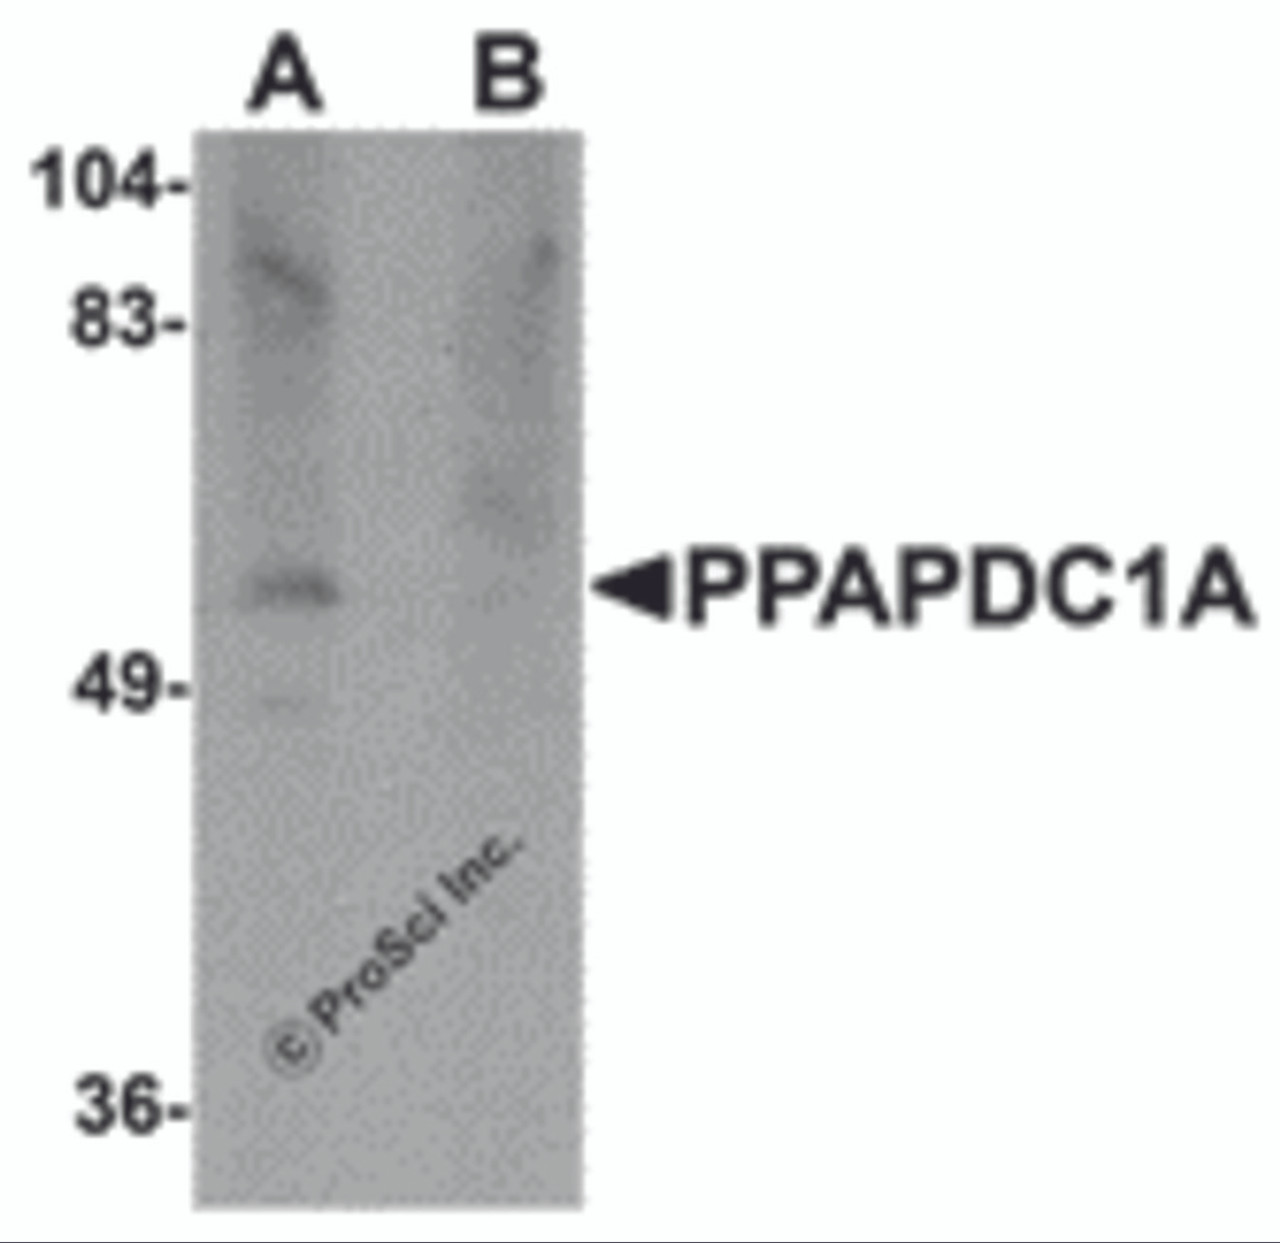 Western blot analysis of PPAPDC1A in human brain tissue lysate with PPAPDC1A antibody at 1 &#956;g/mL in (A) the absence and (B) the presence of blocking peptide.